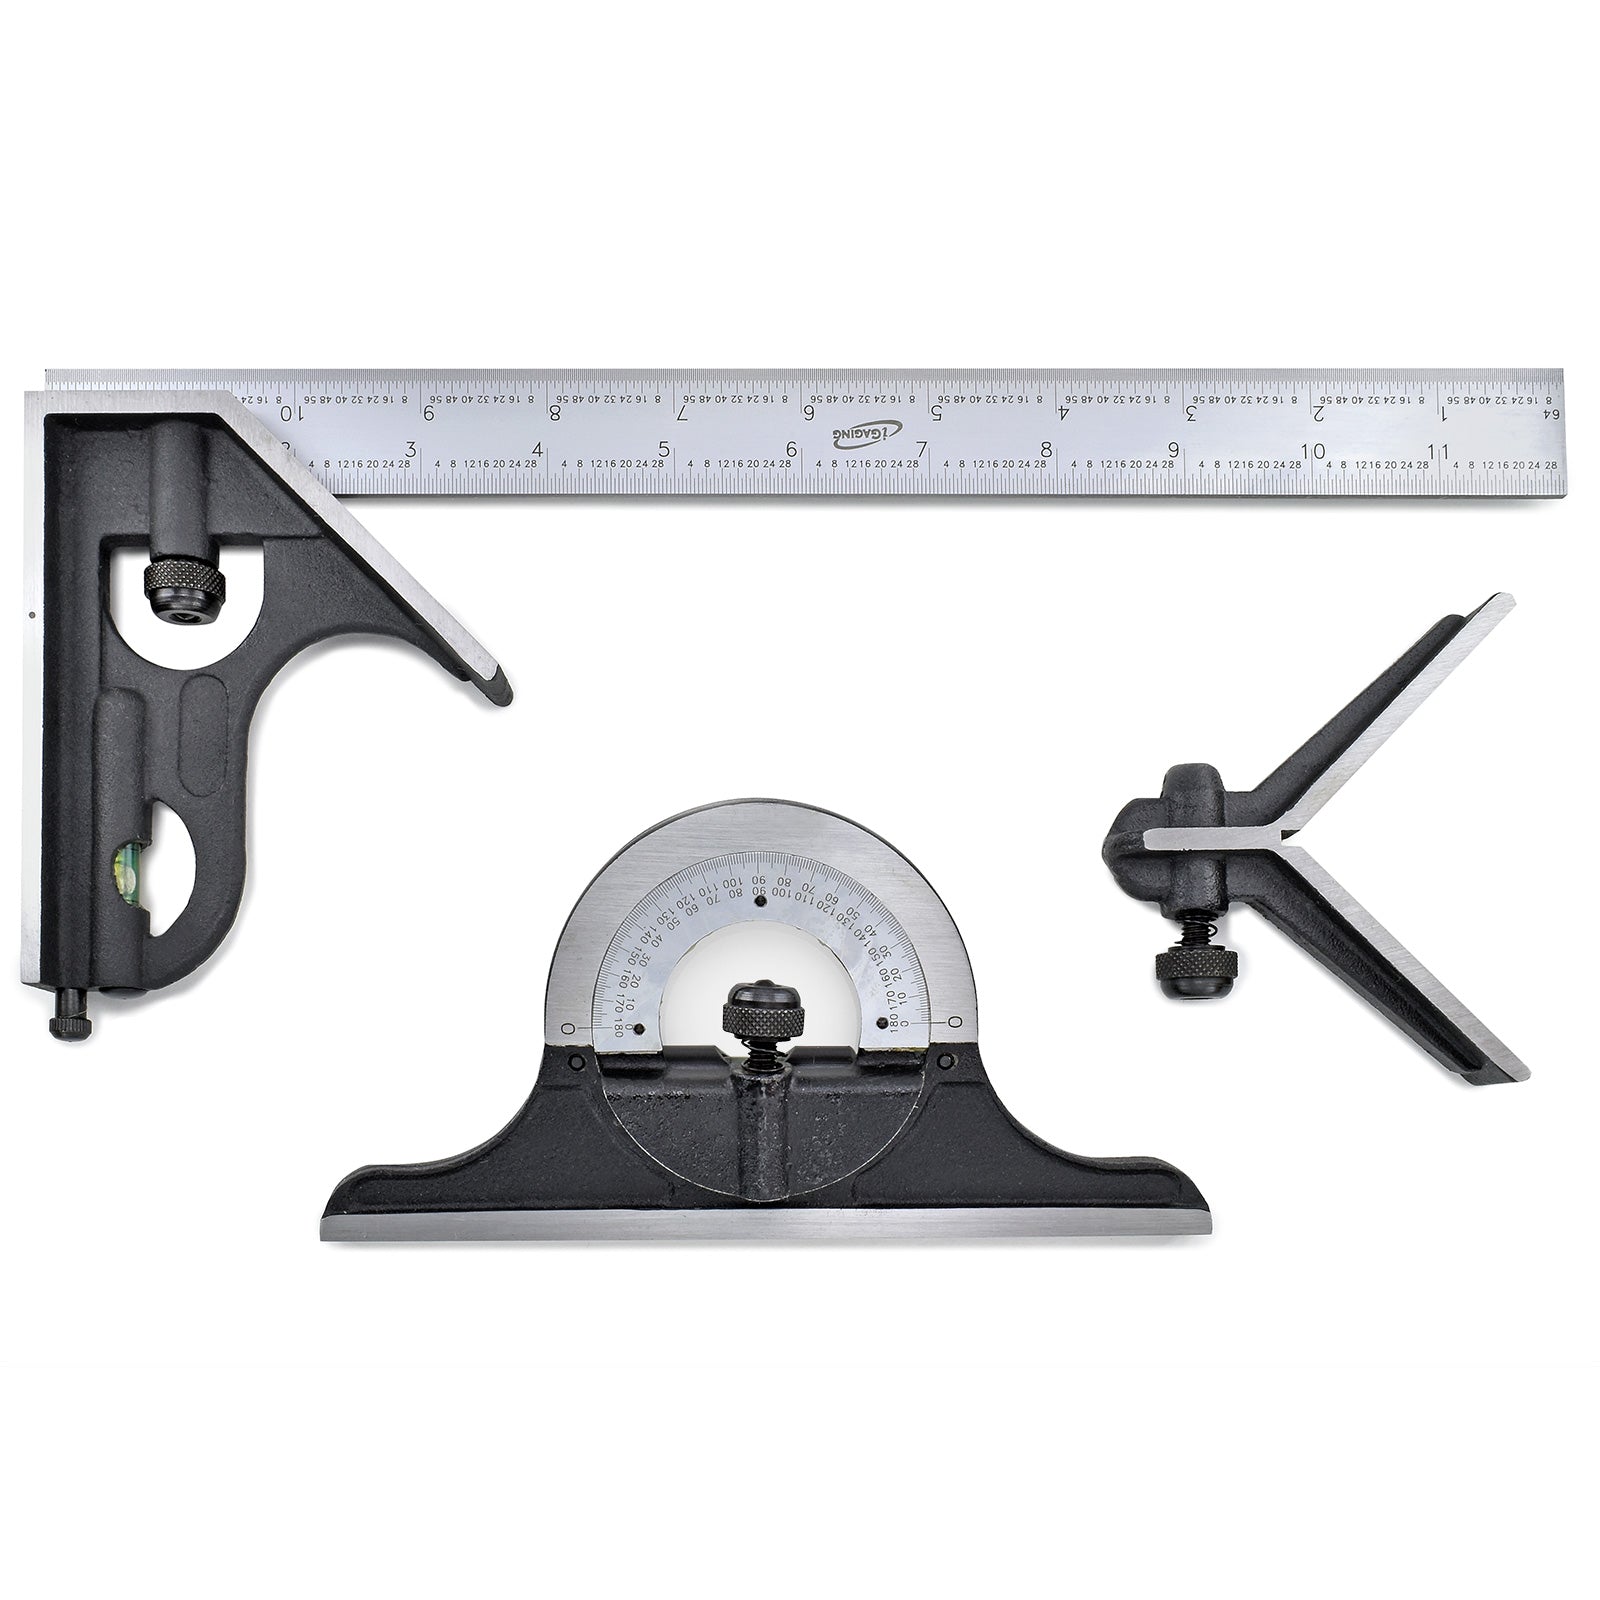 iGaging Precision 12" Combination Square with 3 Interchangeable Heads